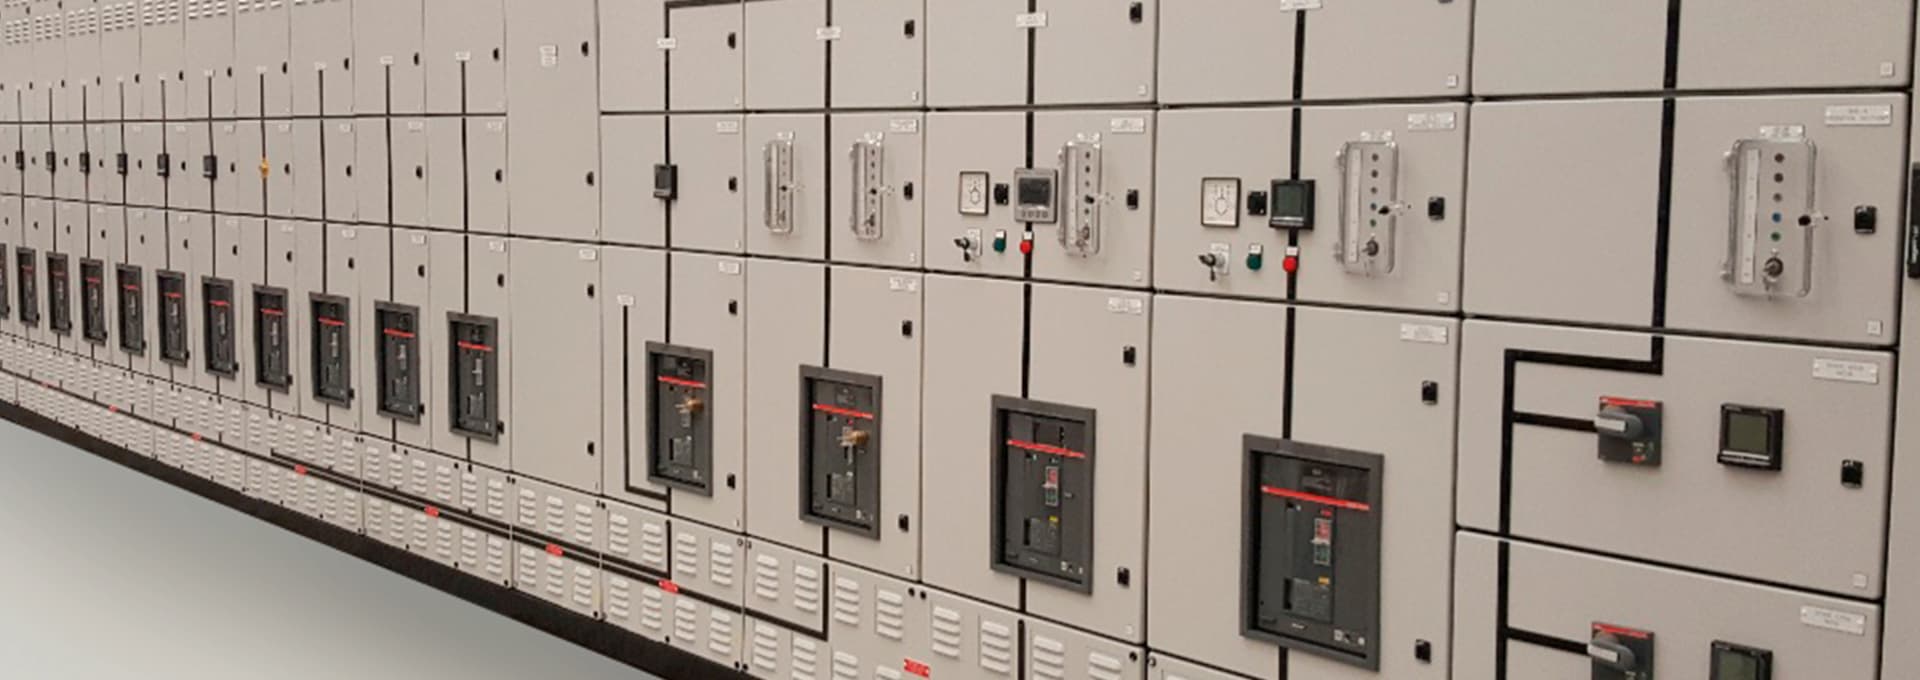 Electric switchboard: Main switchboards (lv), panelboards, transformers, parts and components for electrical distribution